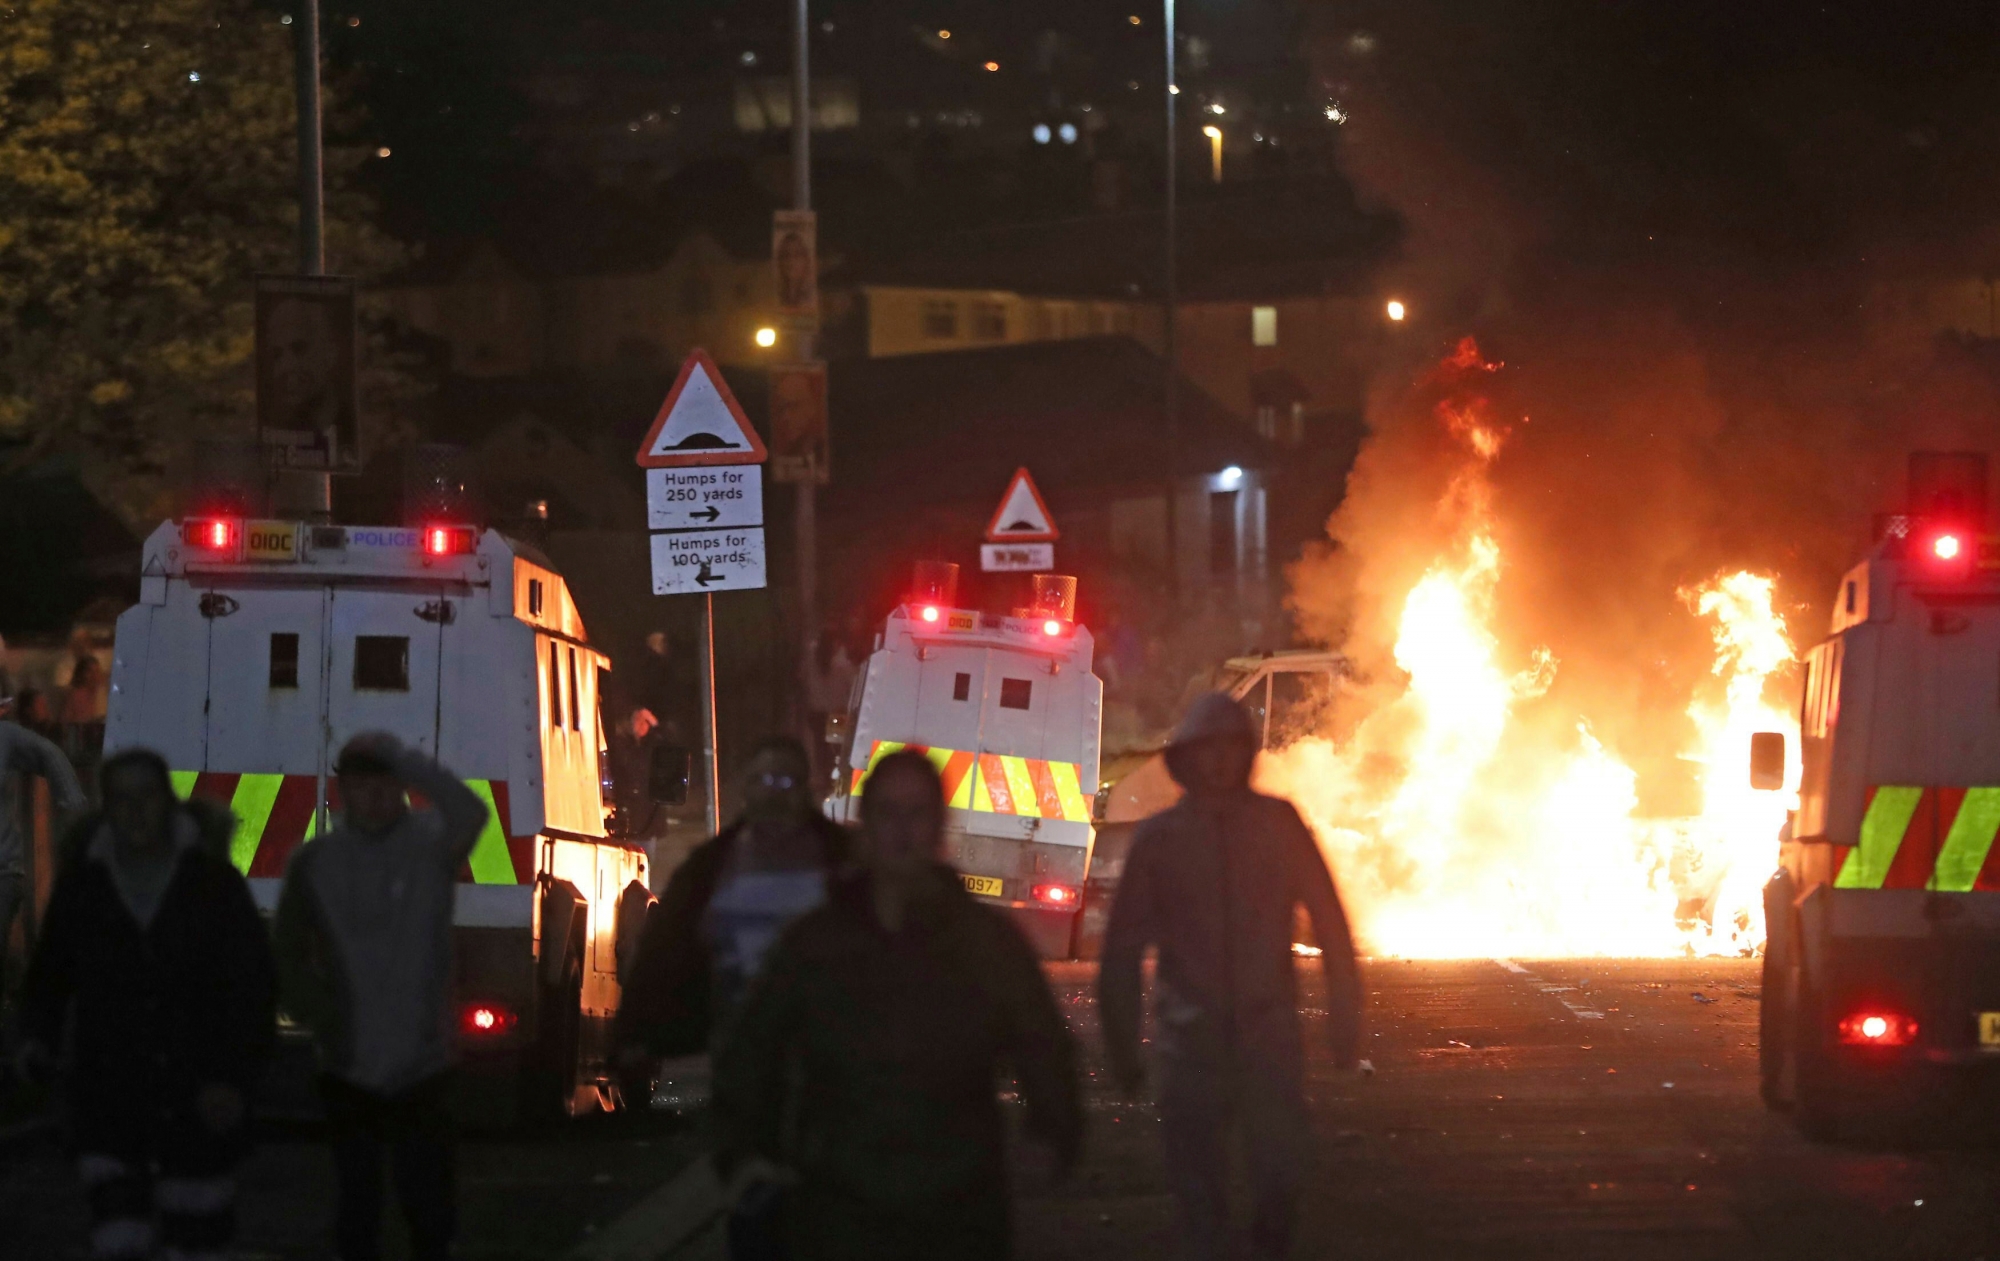 A car burns after petrol bombs were thrown at police in Creggan, Londonderry, in Northern Ireland, Thursday, April 18, 2019. (Niall Carson/PA via AP) Londonderry Unrest